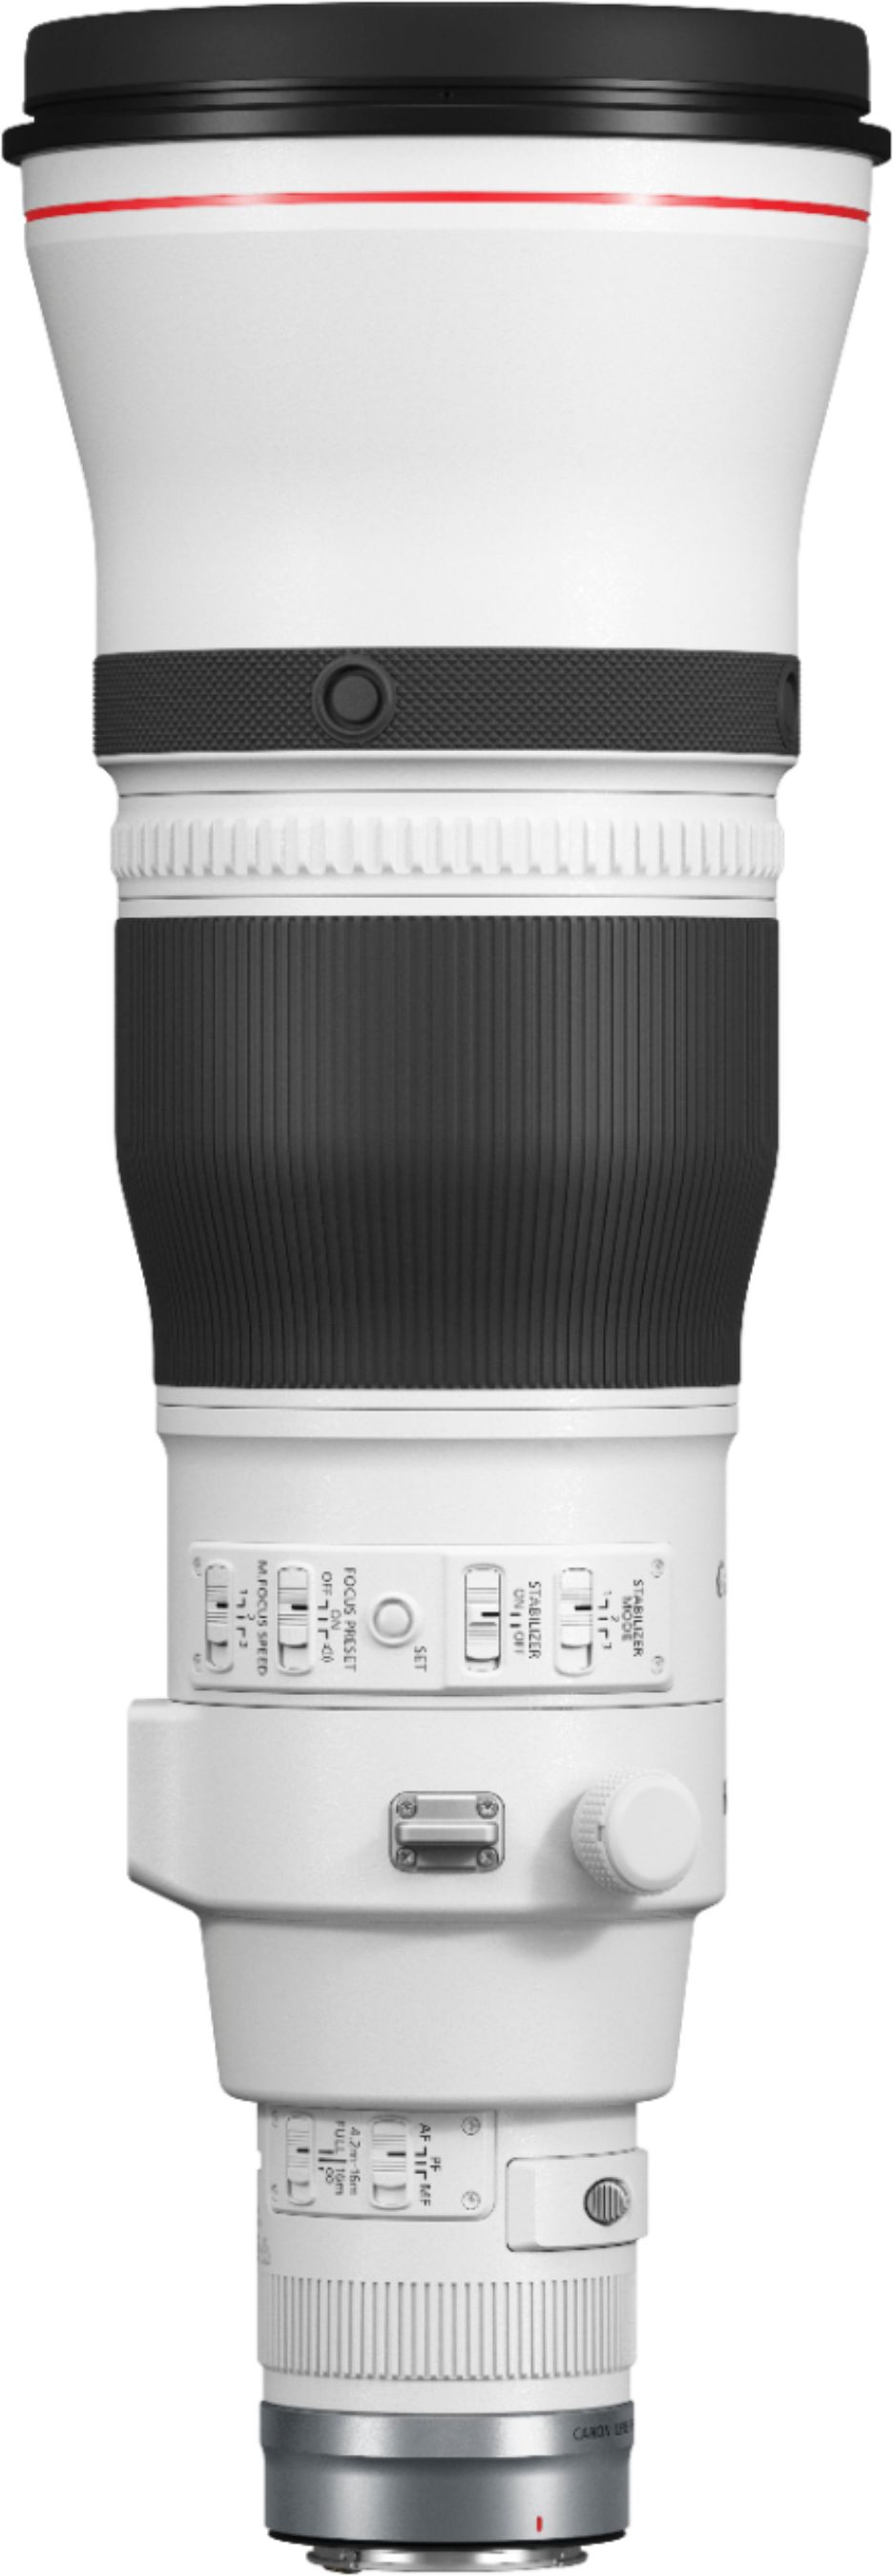 Left View: Canon - RF 600 f/4 L IS USM Telephoto Prime Lens for RF Mount Cameras - White